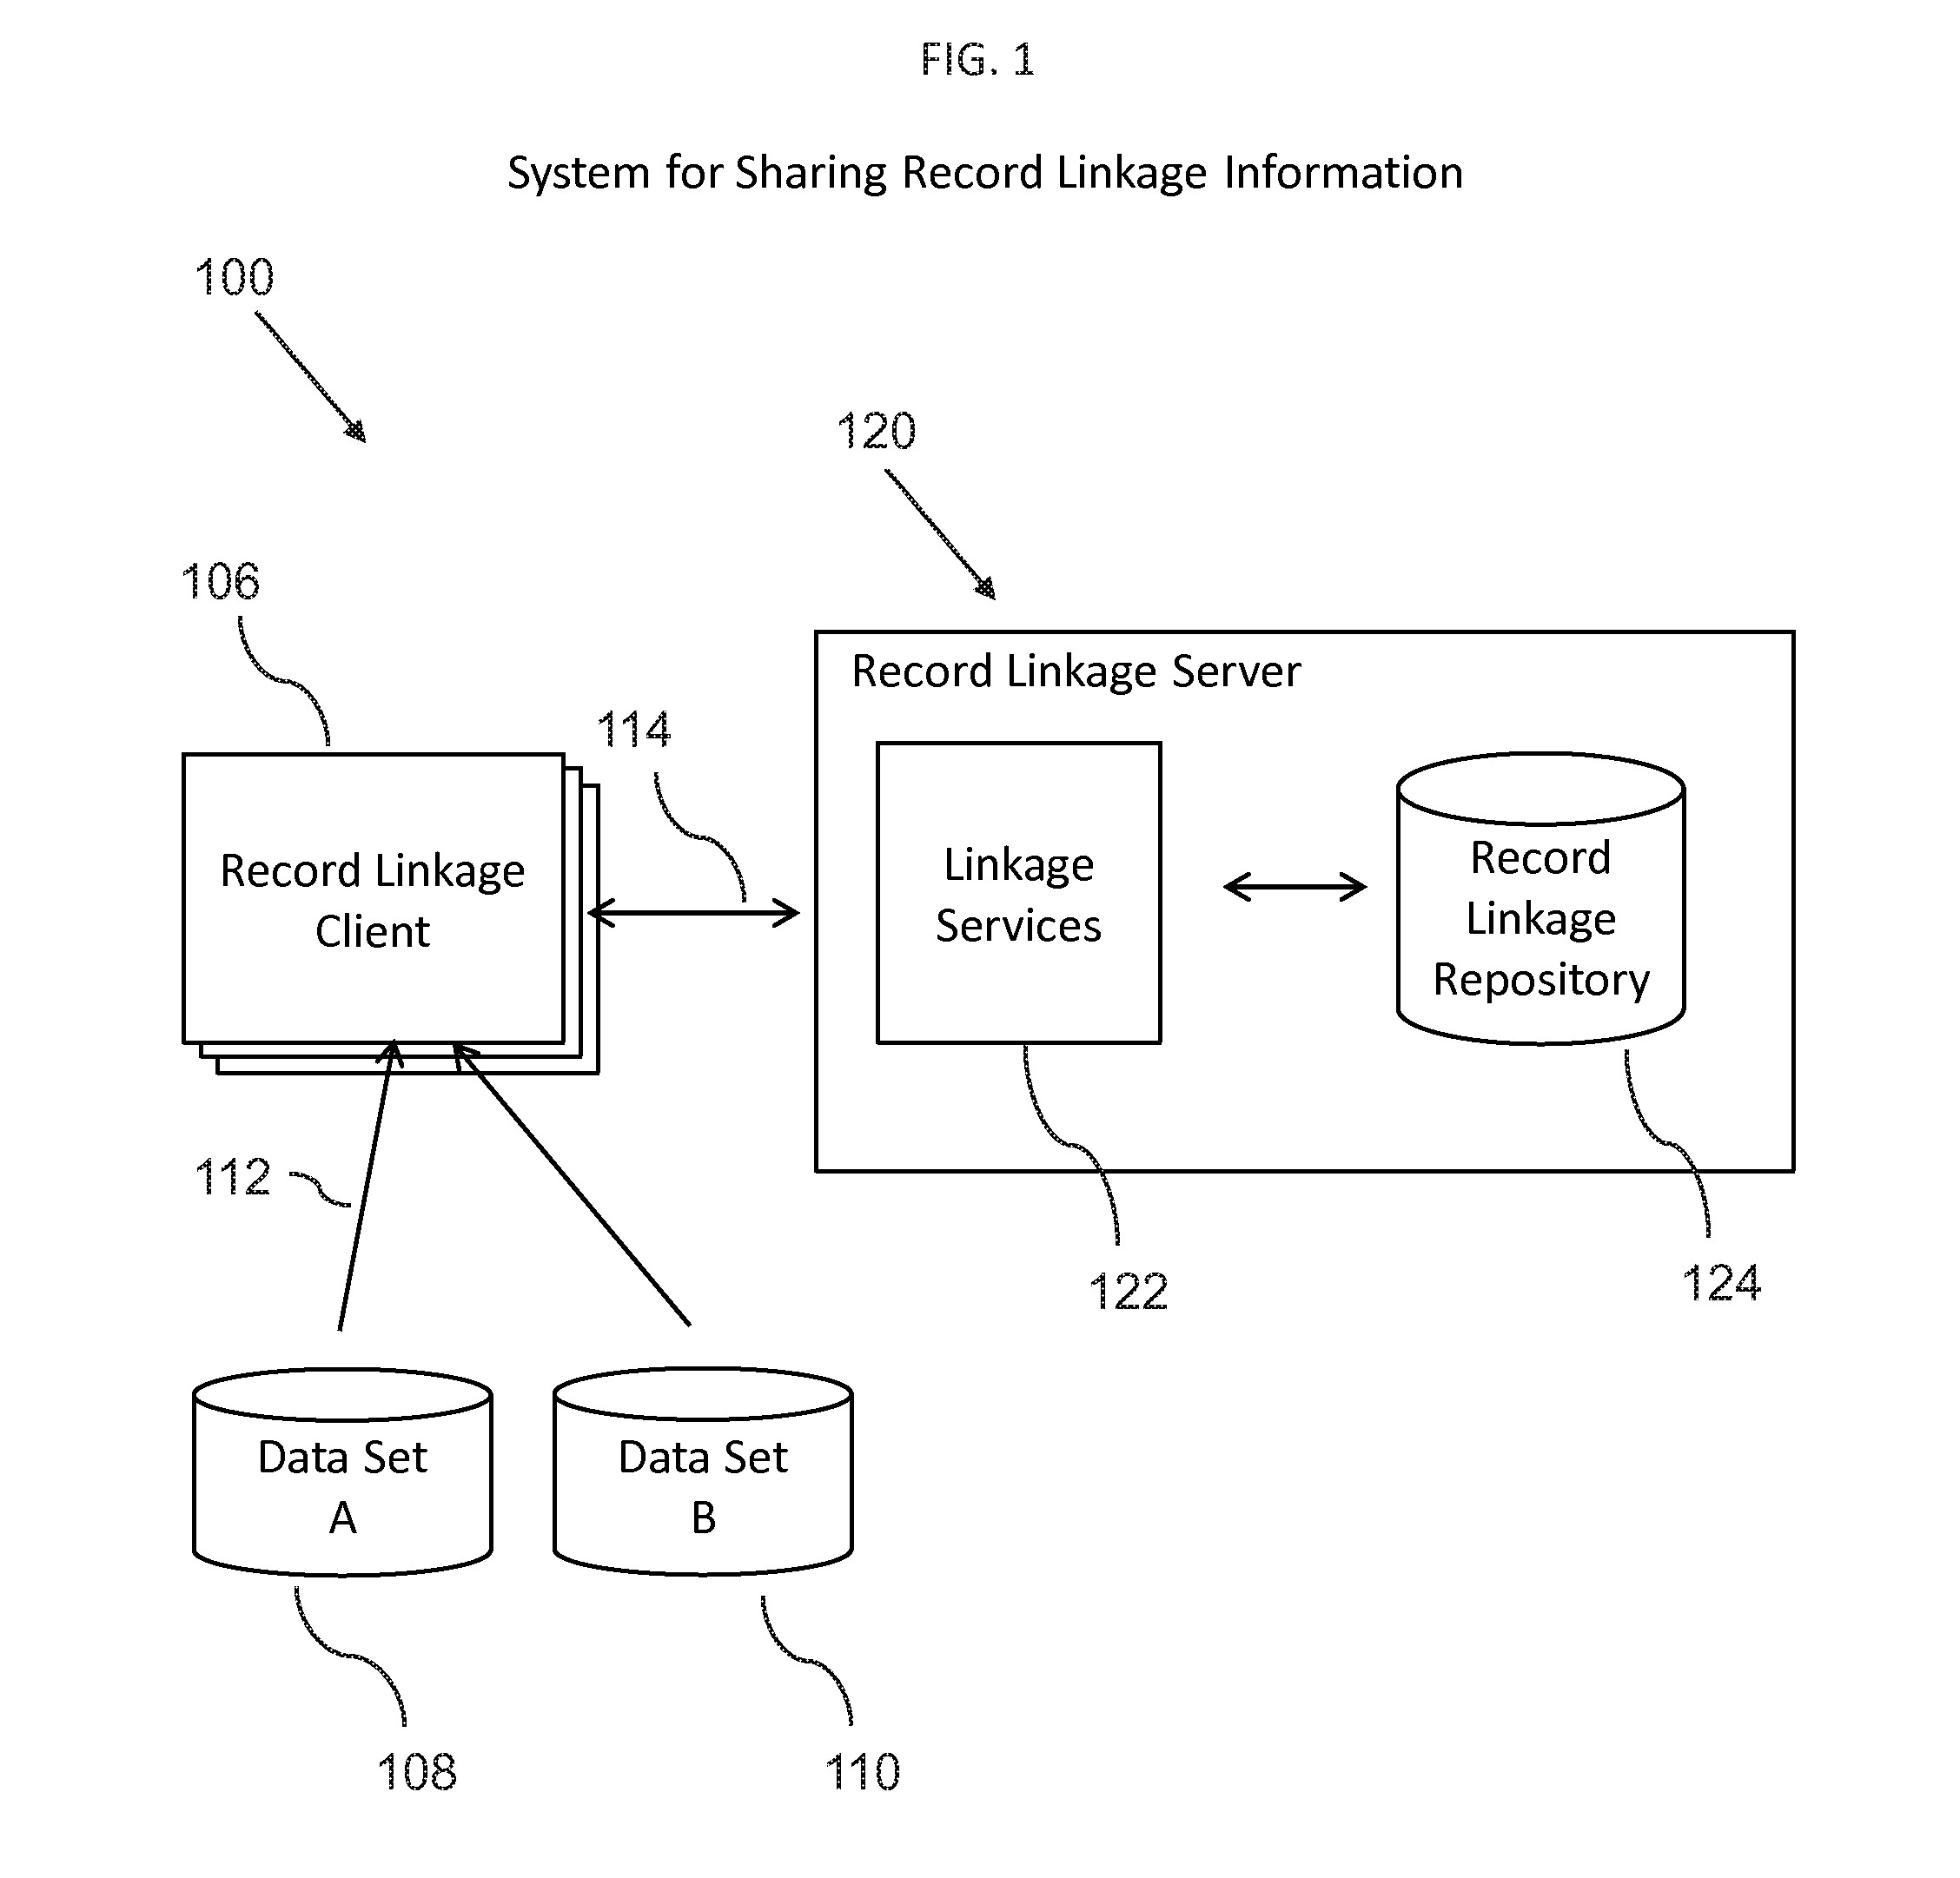 Record linkage sharing using labeled comparison vectors and a machine learning domain classification trainer